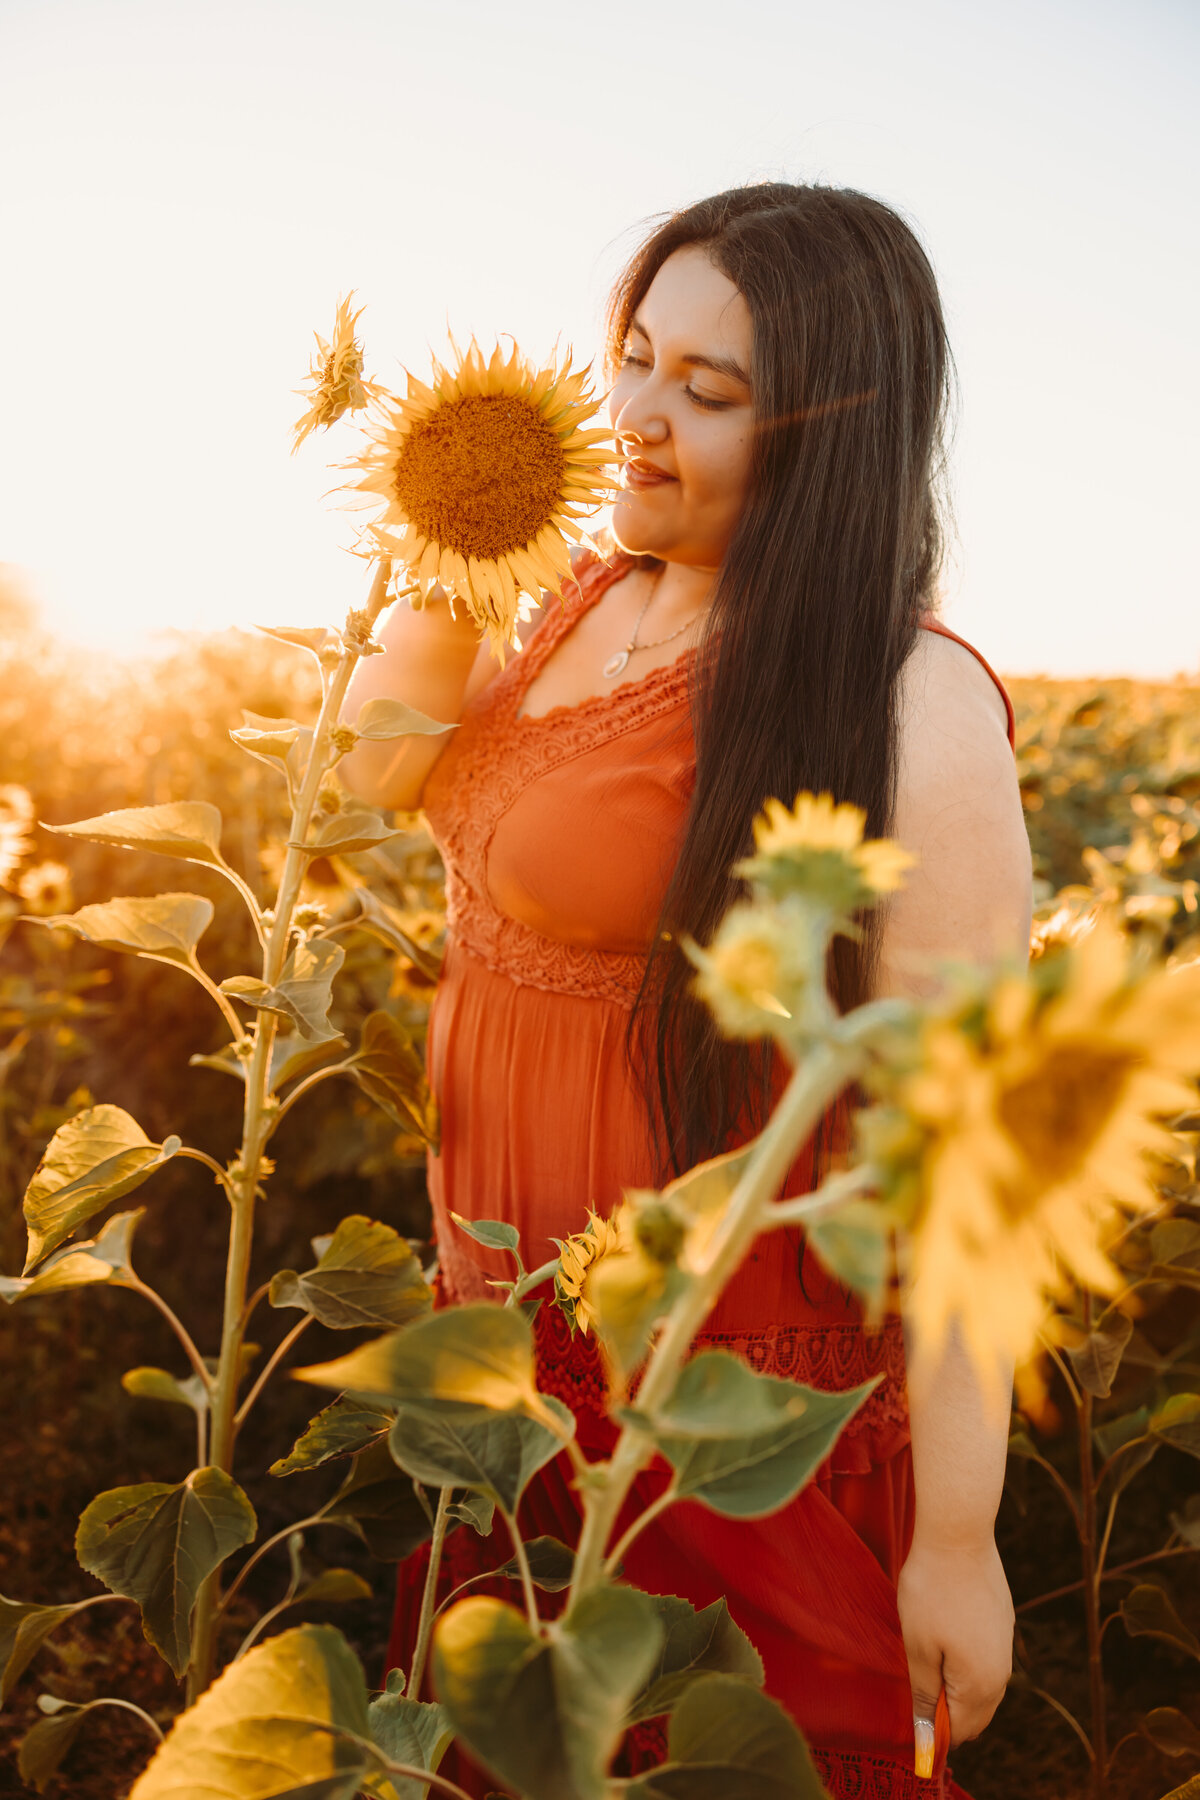 Maria poses with a sunflower for her Montrose senior pictures.